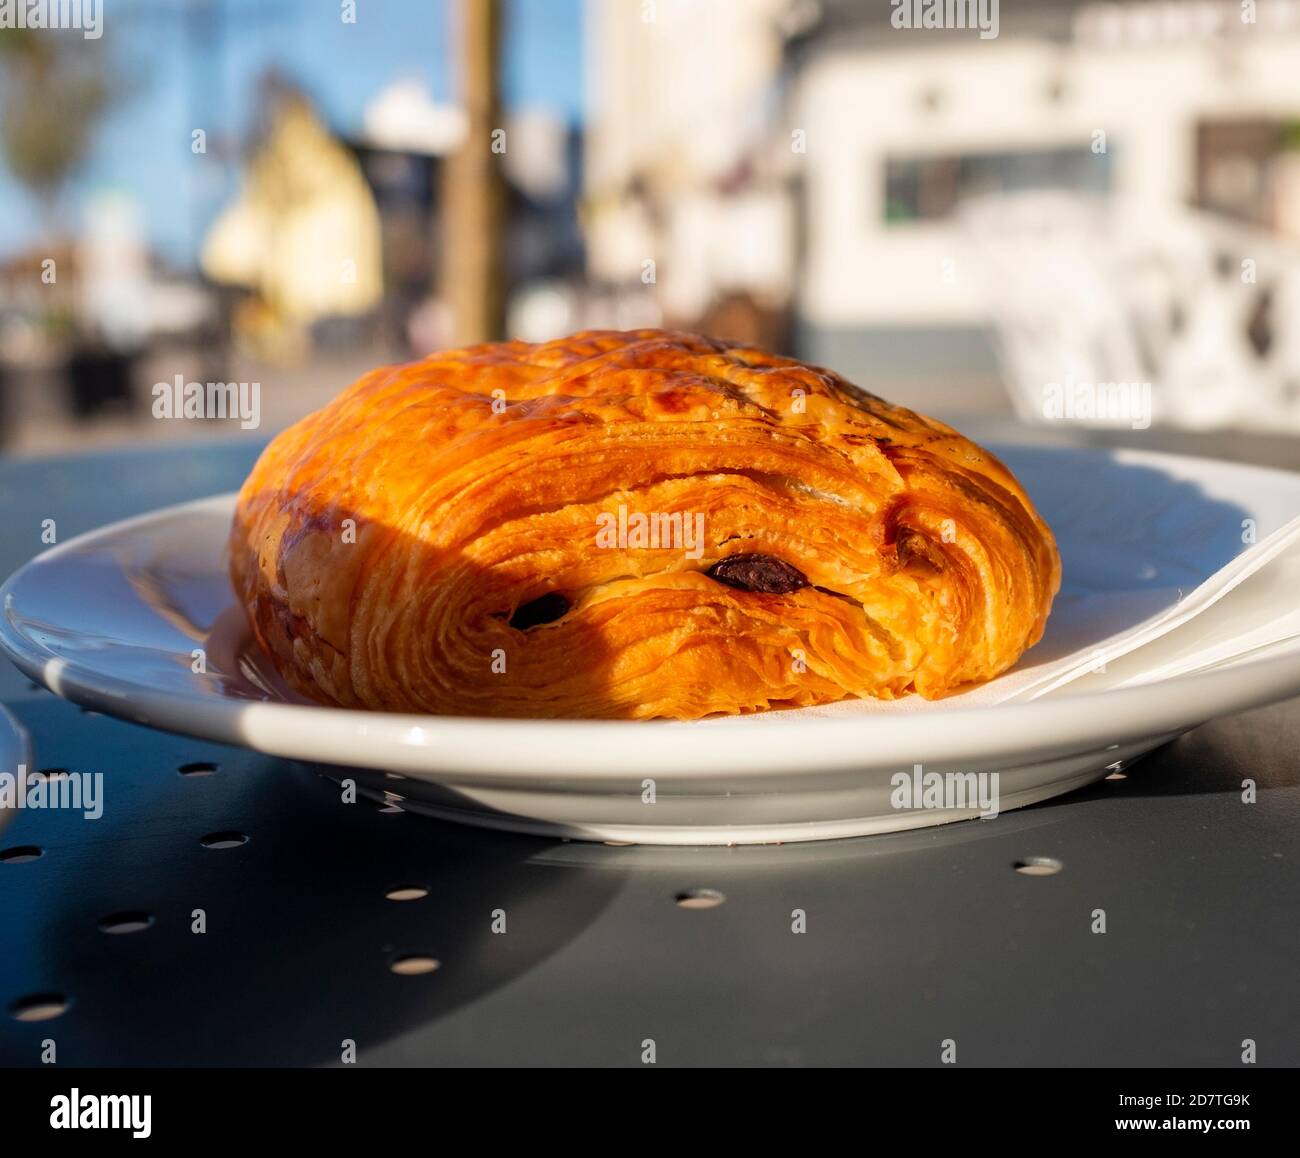 Pain au Chocolate pastry on a plate at an outside street cafe Stock Photo